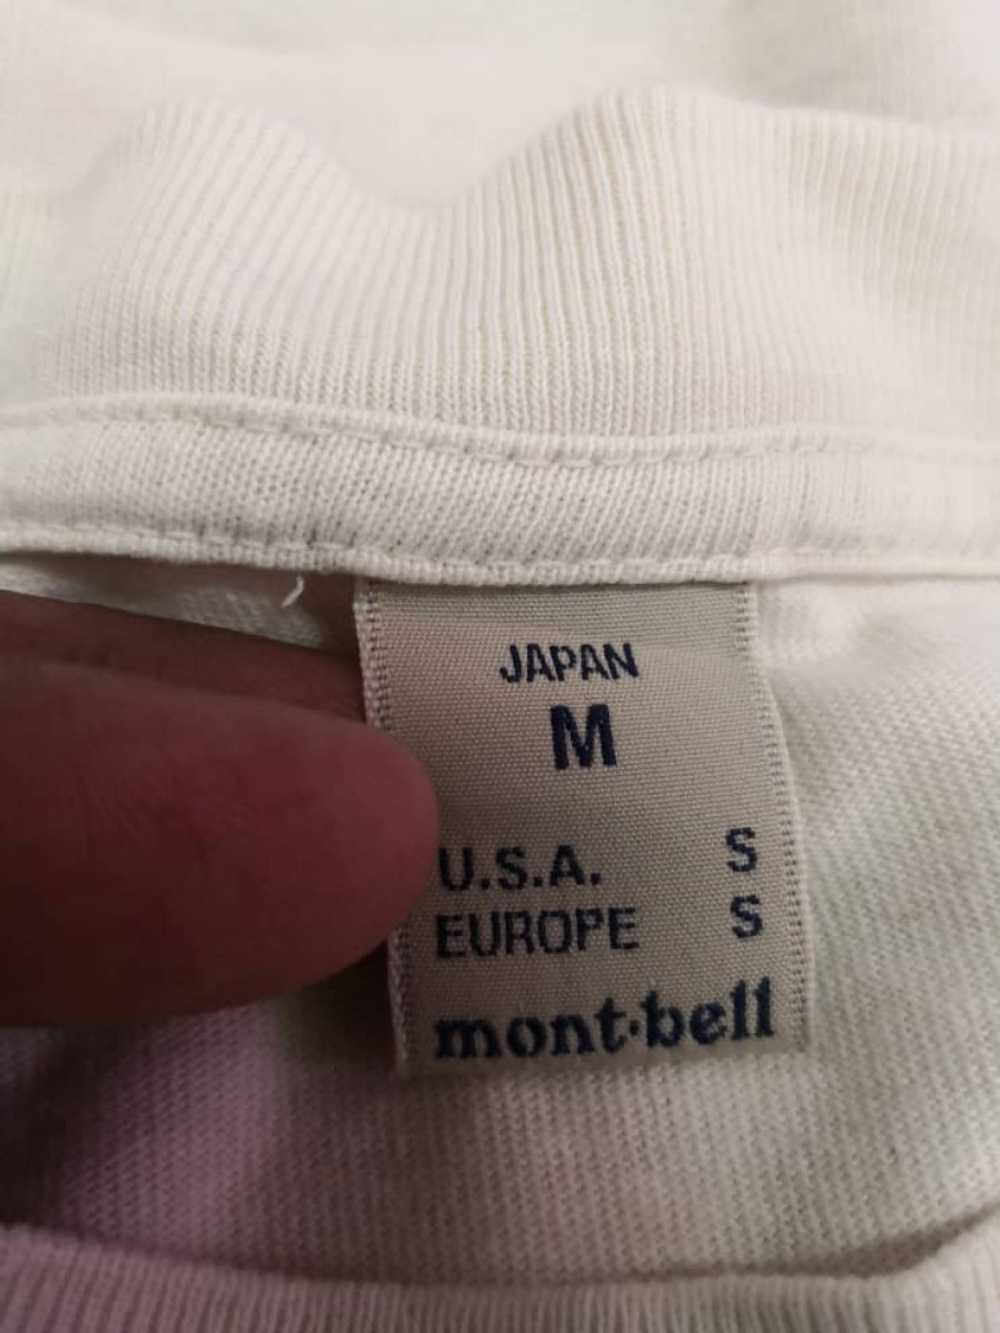 Japanese Brand - Montbell - image 2